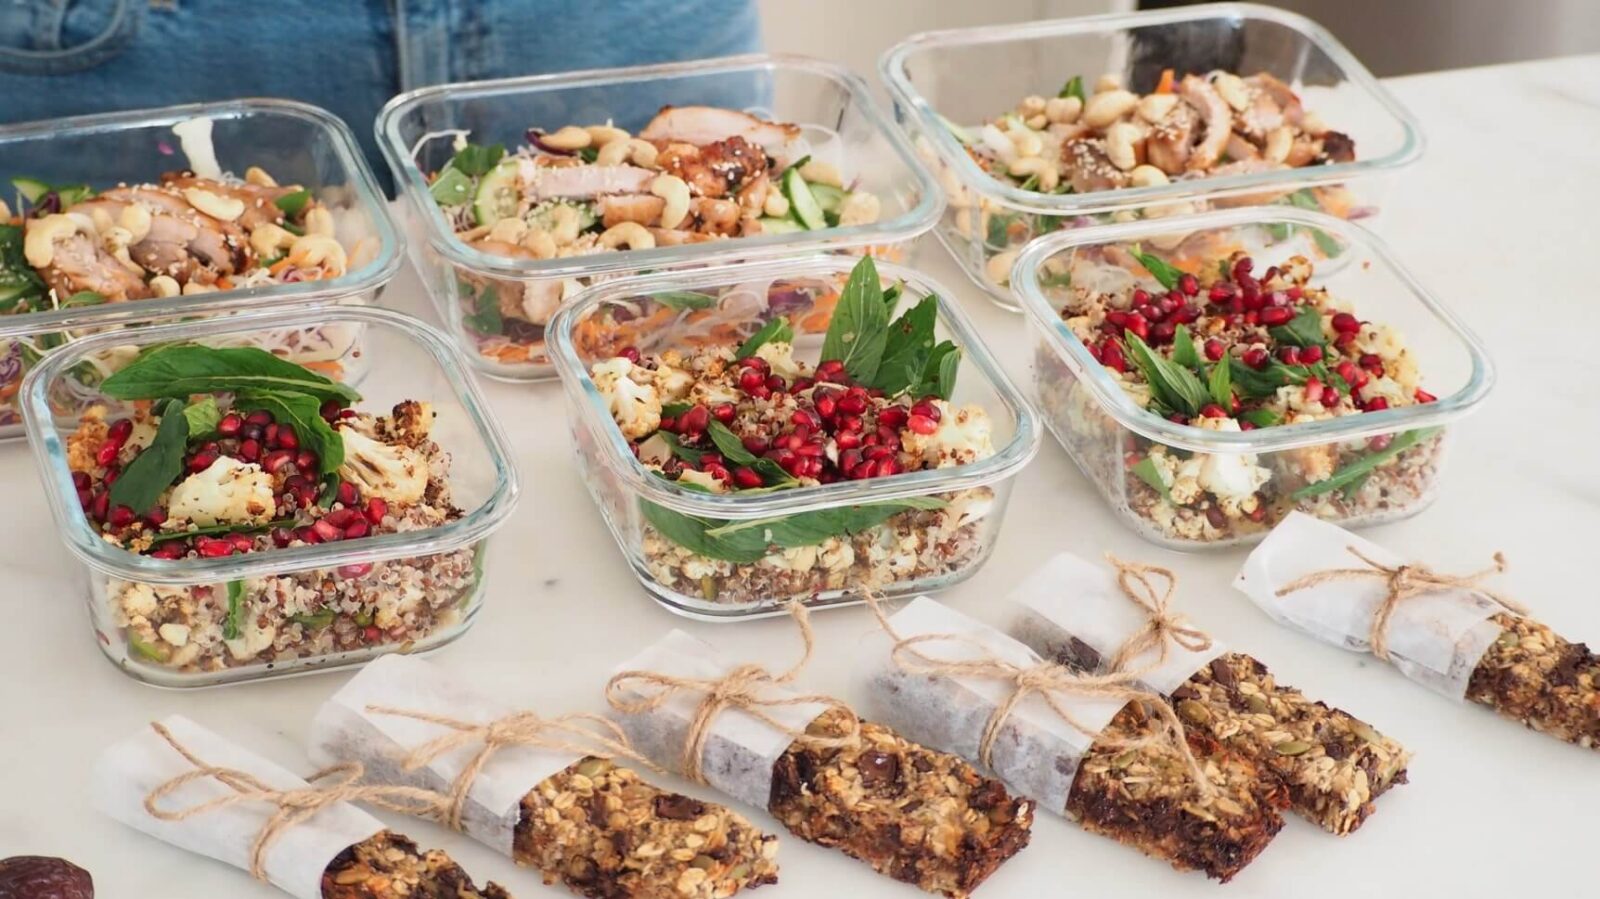 Use Back to Basics to make these healthy muesli bars or meals for your family. Image: Lyndi Cohen